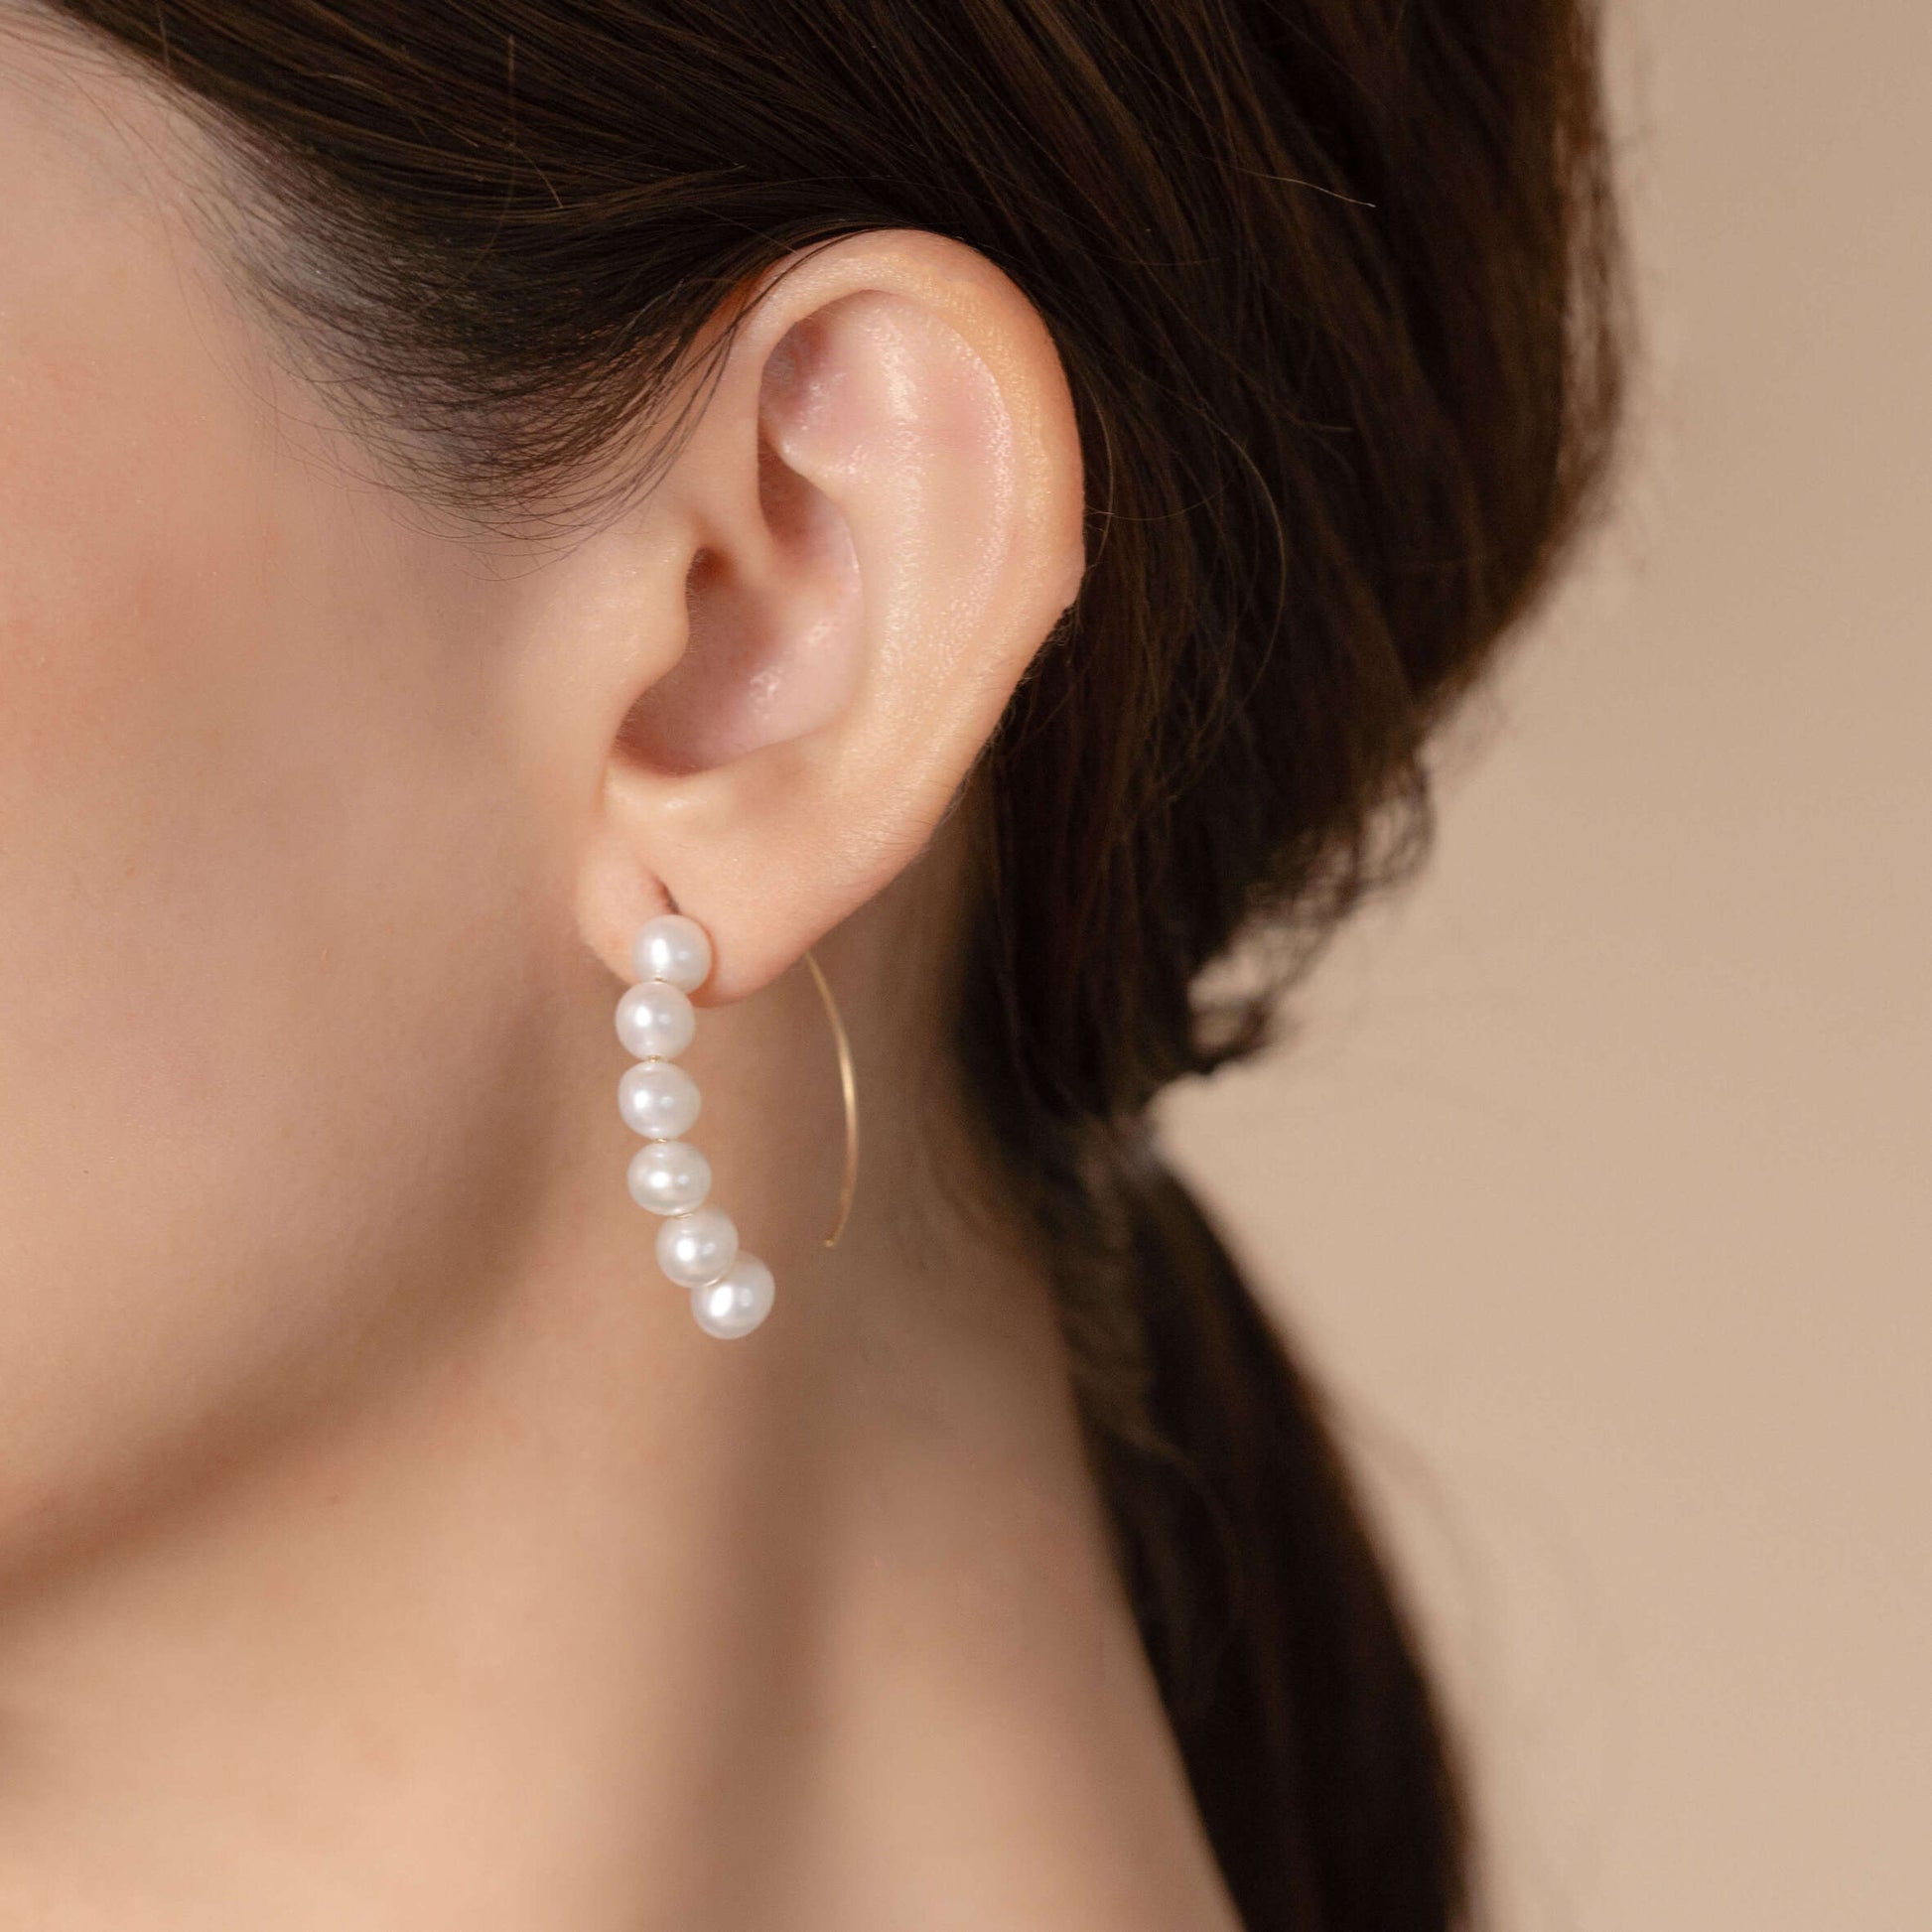 Elegant white pearl earrings crafted from lustrous white pearls, perfect for adding a touch of sophistication to any outfit.